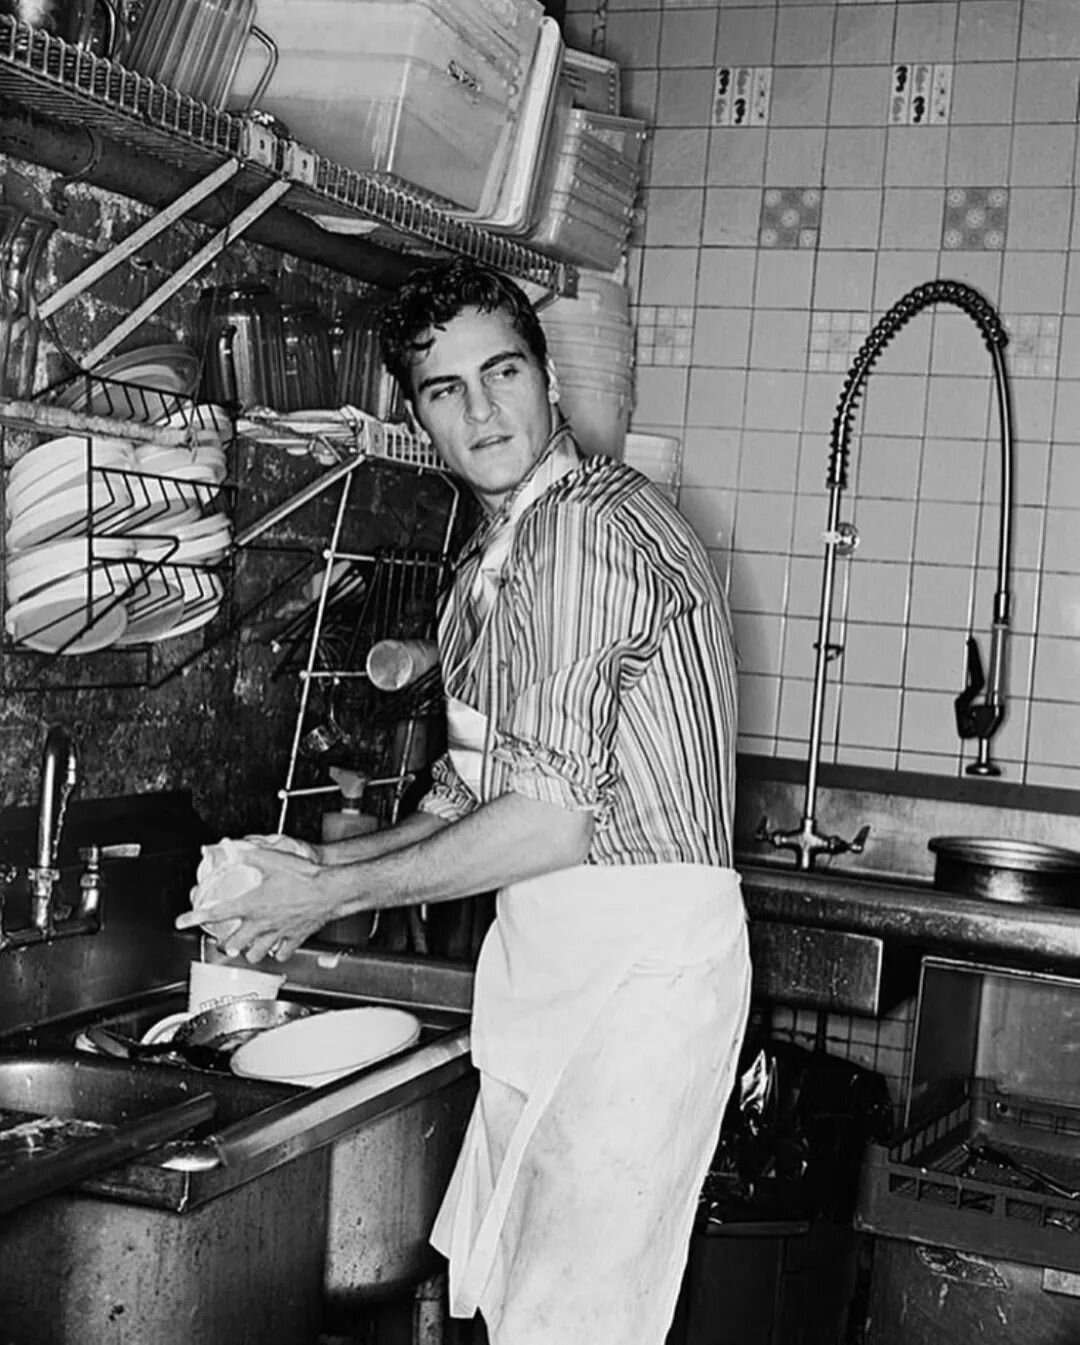 Currently looking for part or full time dishwashers . Competitive wage and flexible hours . It was glamorous enough for Joaquin Phoenix. 🤷🏻&zwj;♂️
#gocva #mastothemountain  #charactorbuilding 
#funworkenvironment  #freedinner